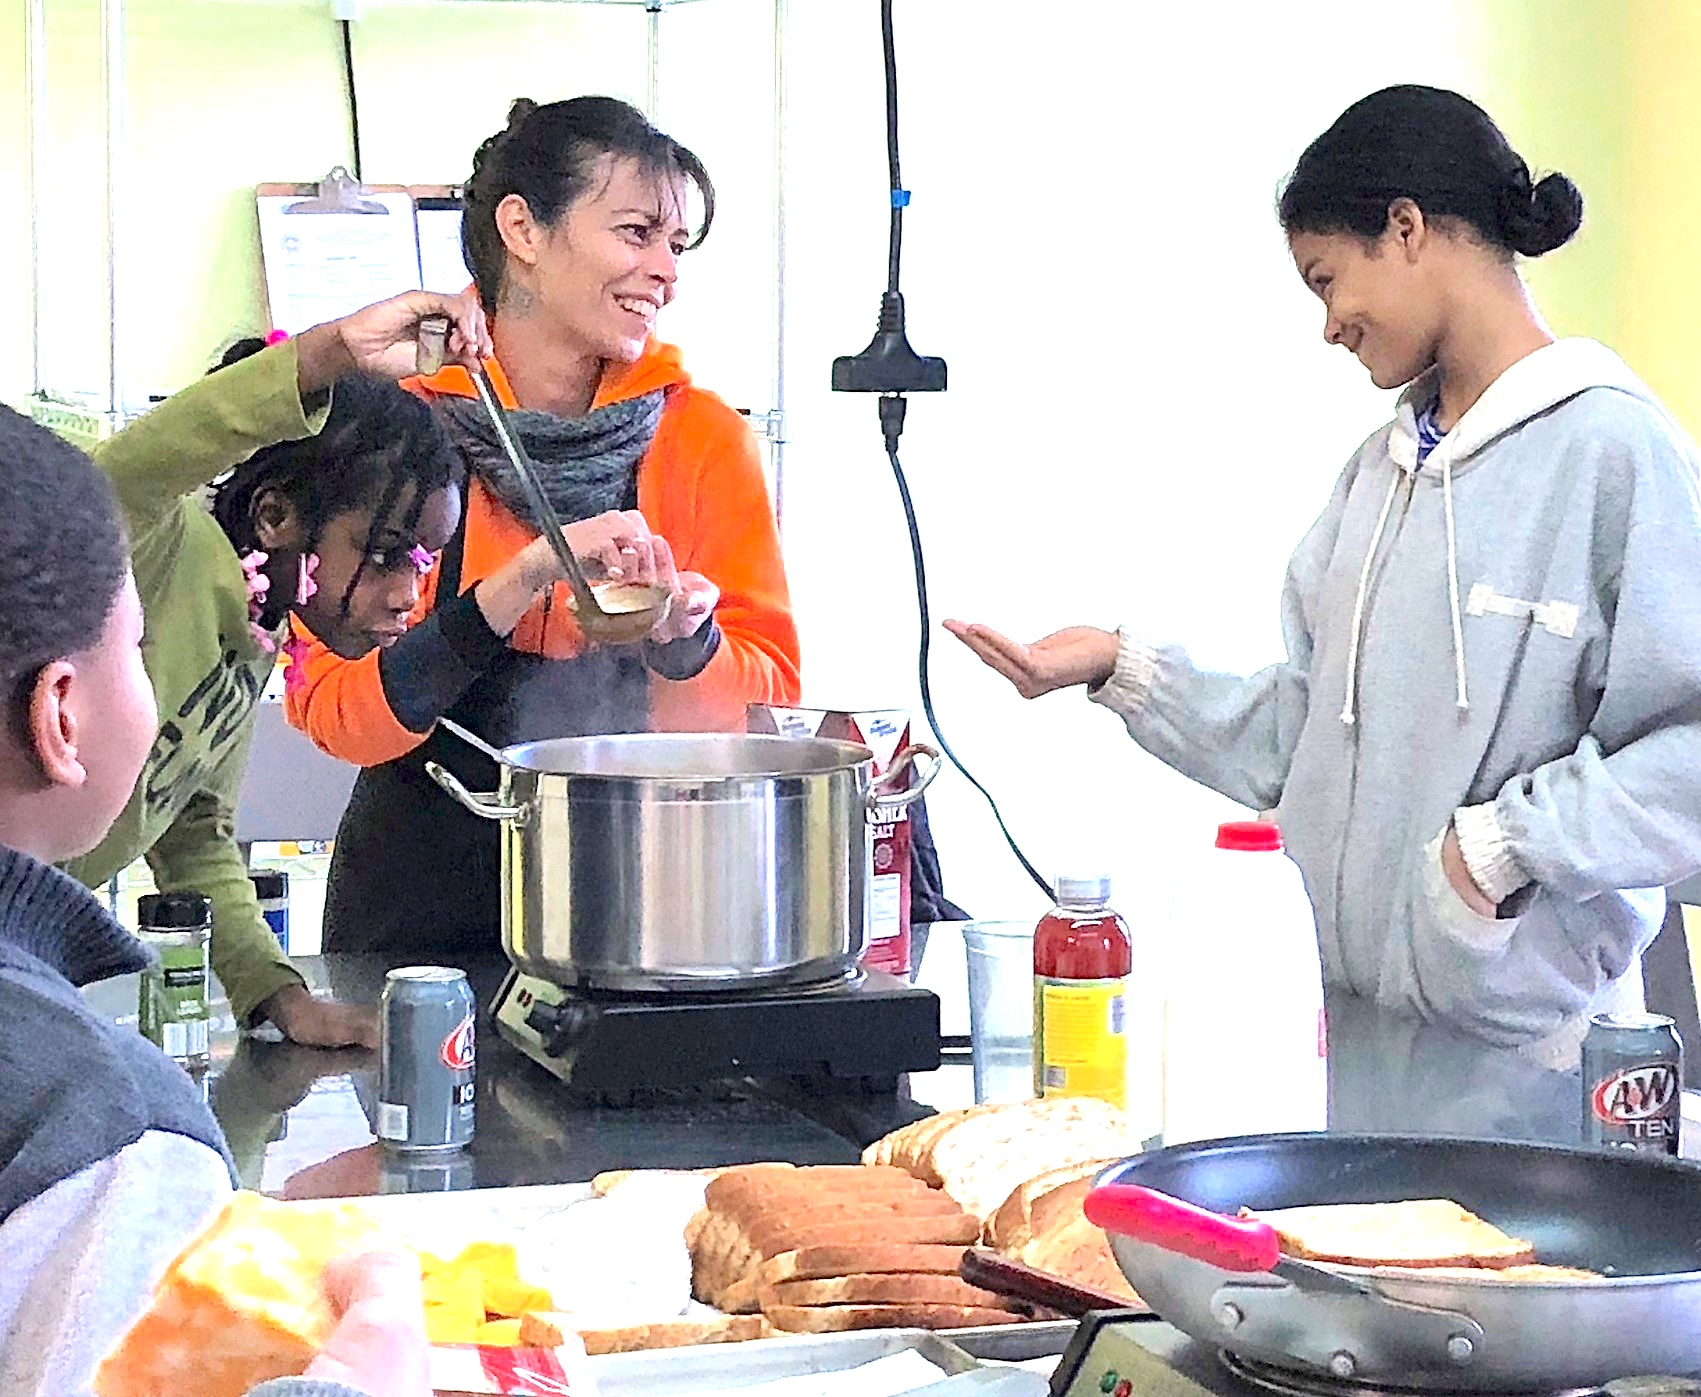 Motown Meals teaches cooking class at the Brightmoor Artisans Collective